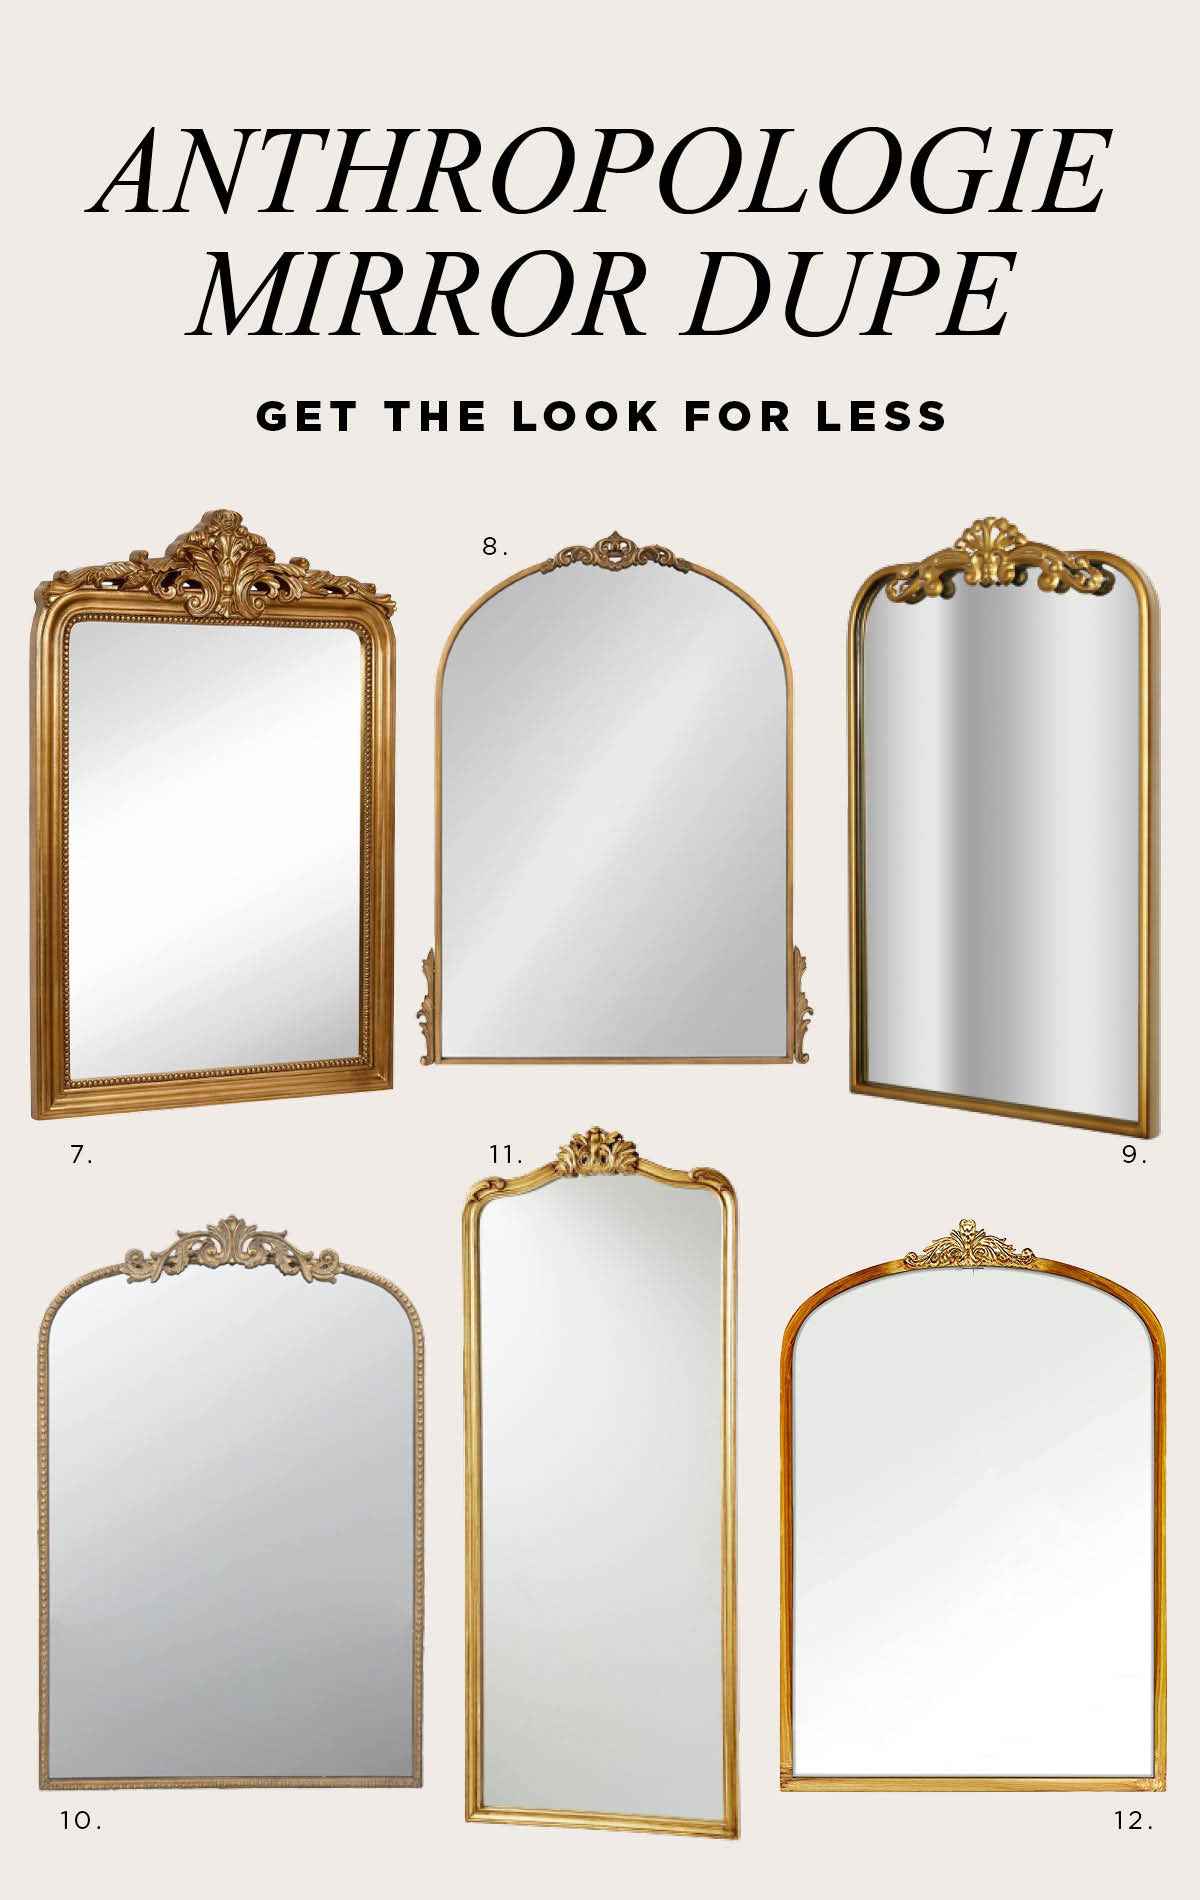 Anthropologie Mirror Dupe - Love the Anthropologie aesthetic but not the price tag? Check out these Anthropologie mirror dupes that will give your home the same boho vibe without emptying your wallet.